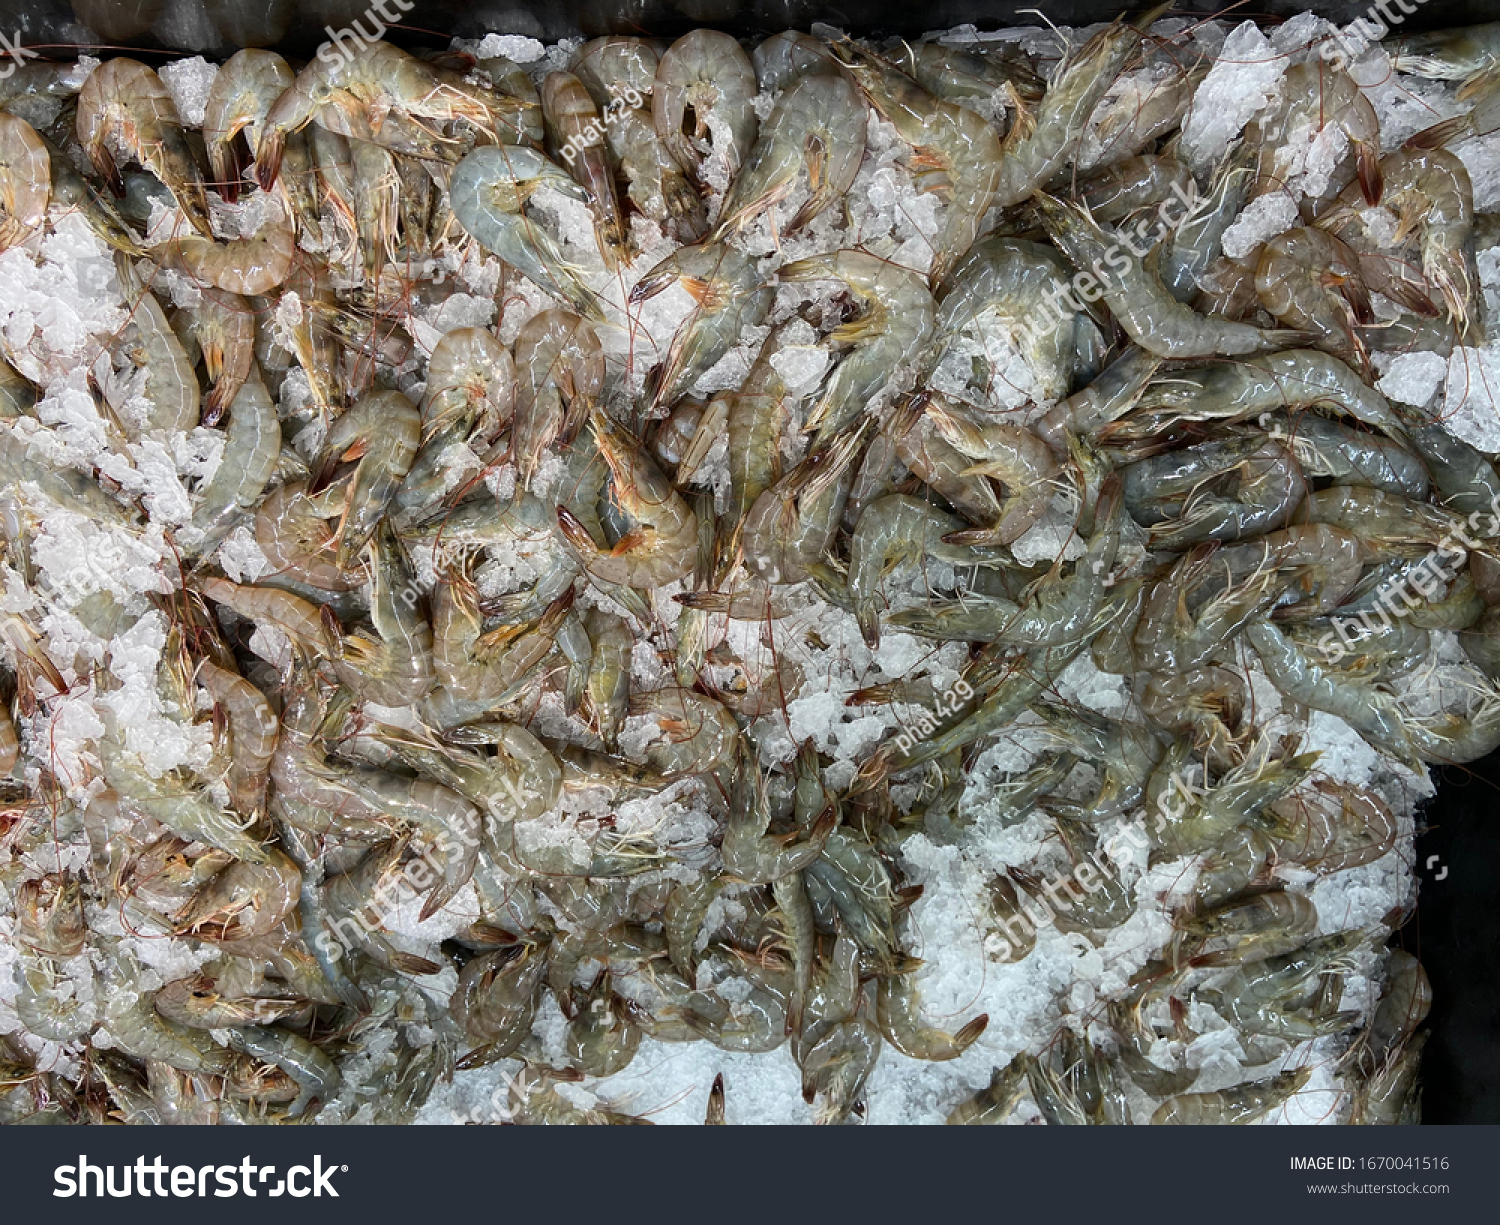 Shrimp texture background Many frozen shrimp Seafood such as shrimp, or used to be at the Shrimp Street Food Festival. #1670041516